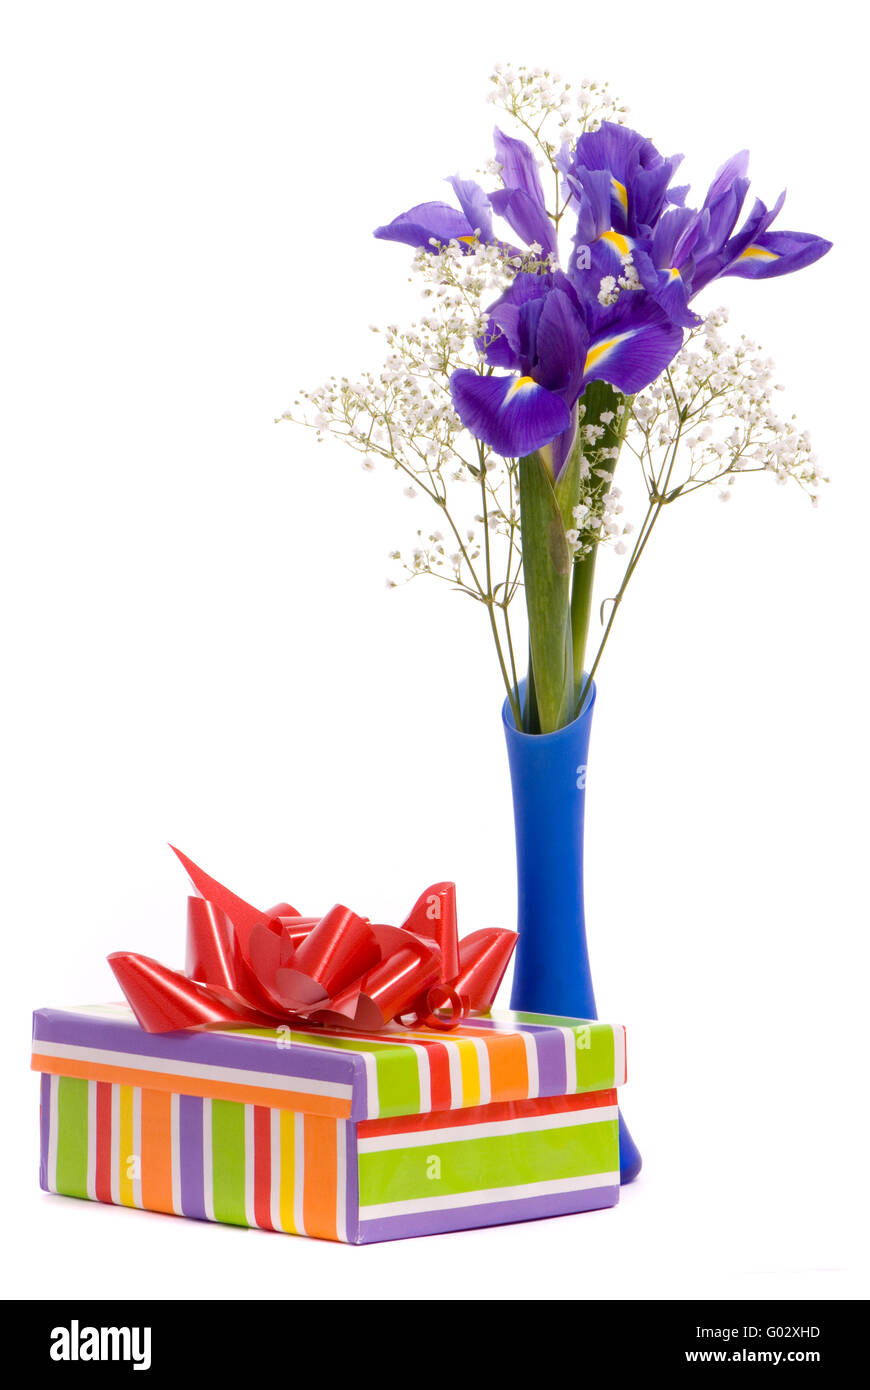 Bouquet of a irises and gift box on white background Stock Photo